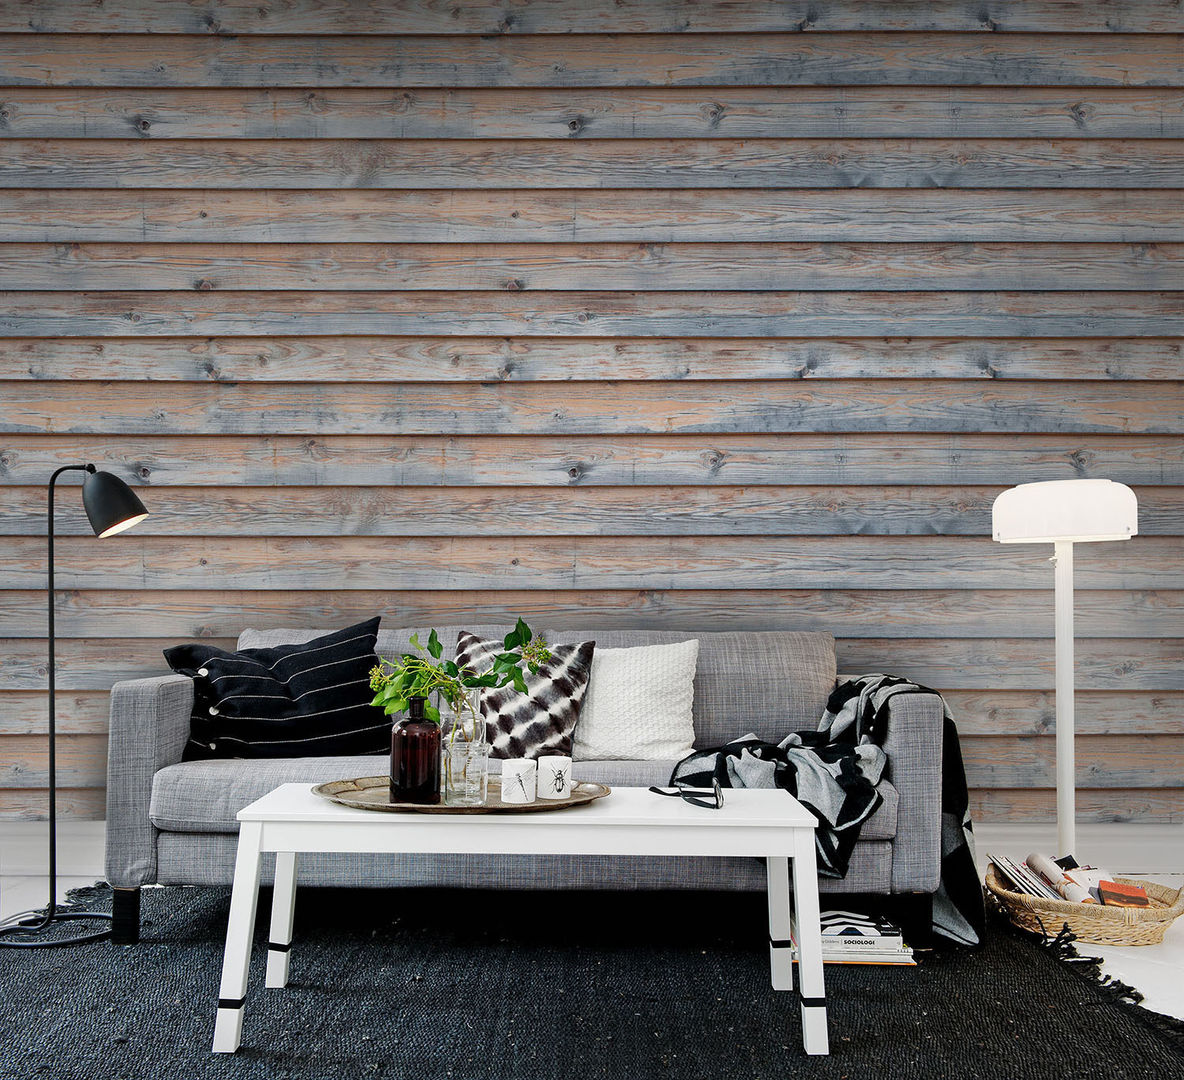 Planks Wallpaper by Mister smith interiors homify Rustic style walls & floors Wallpaper